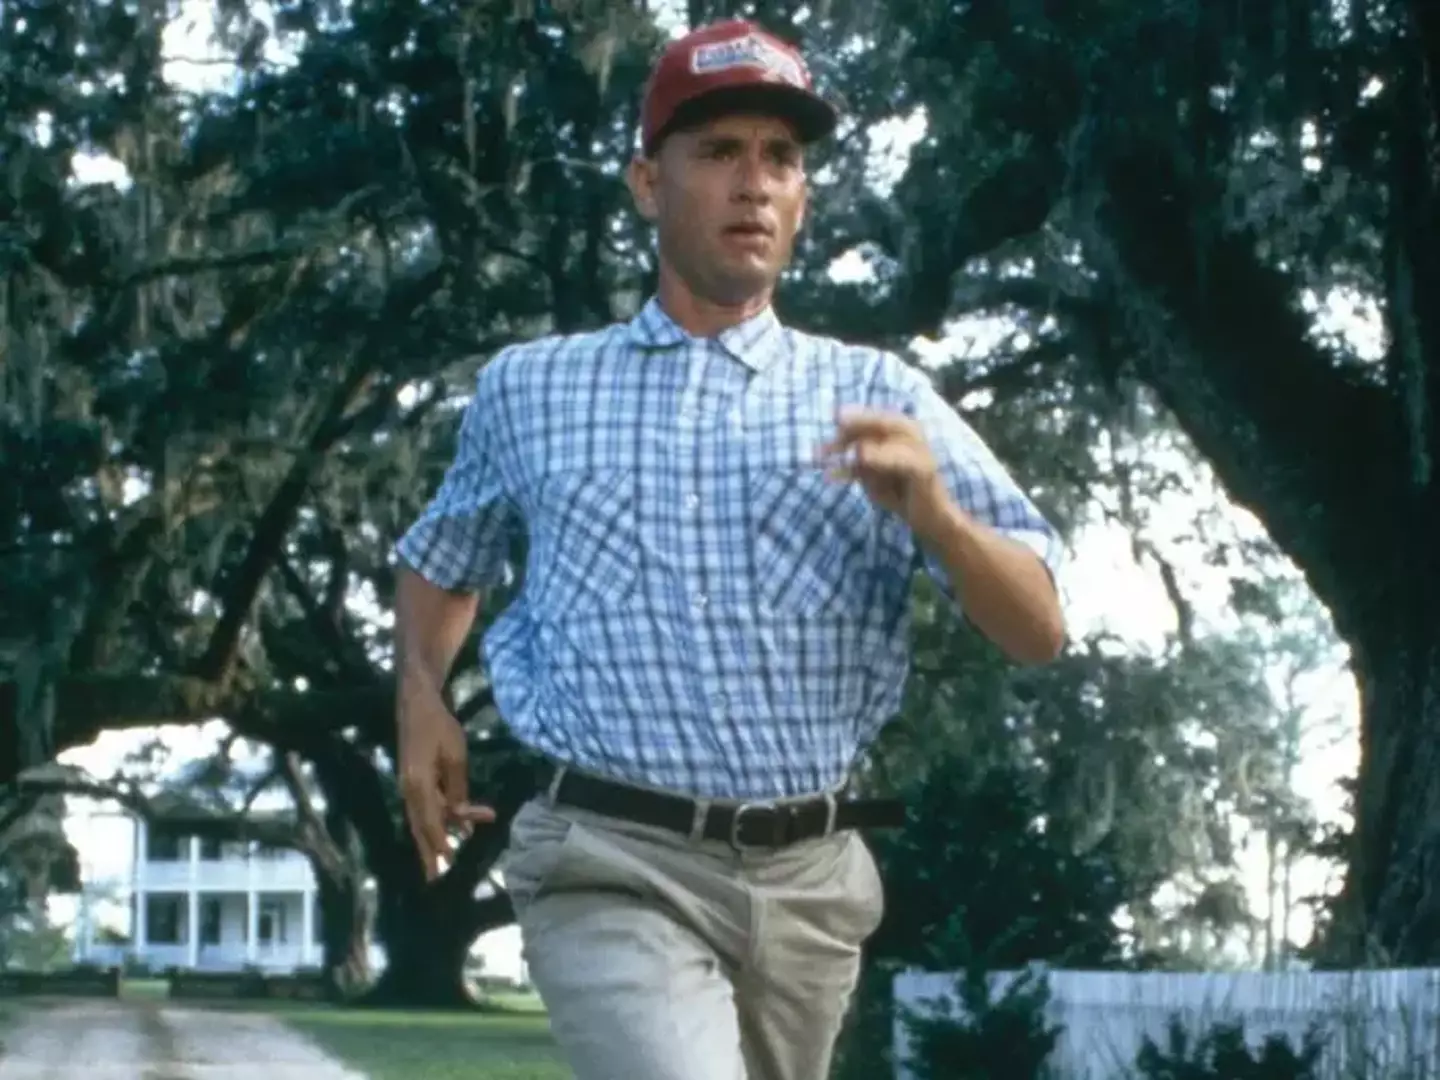 Tom Hanks reportedly earned $40 million for his role in Forrest Gump.